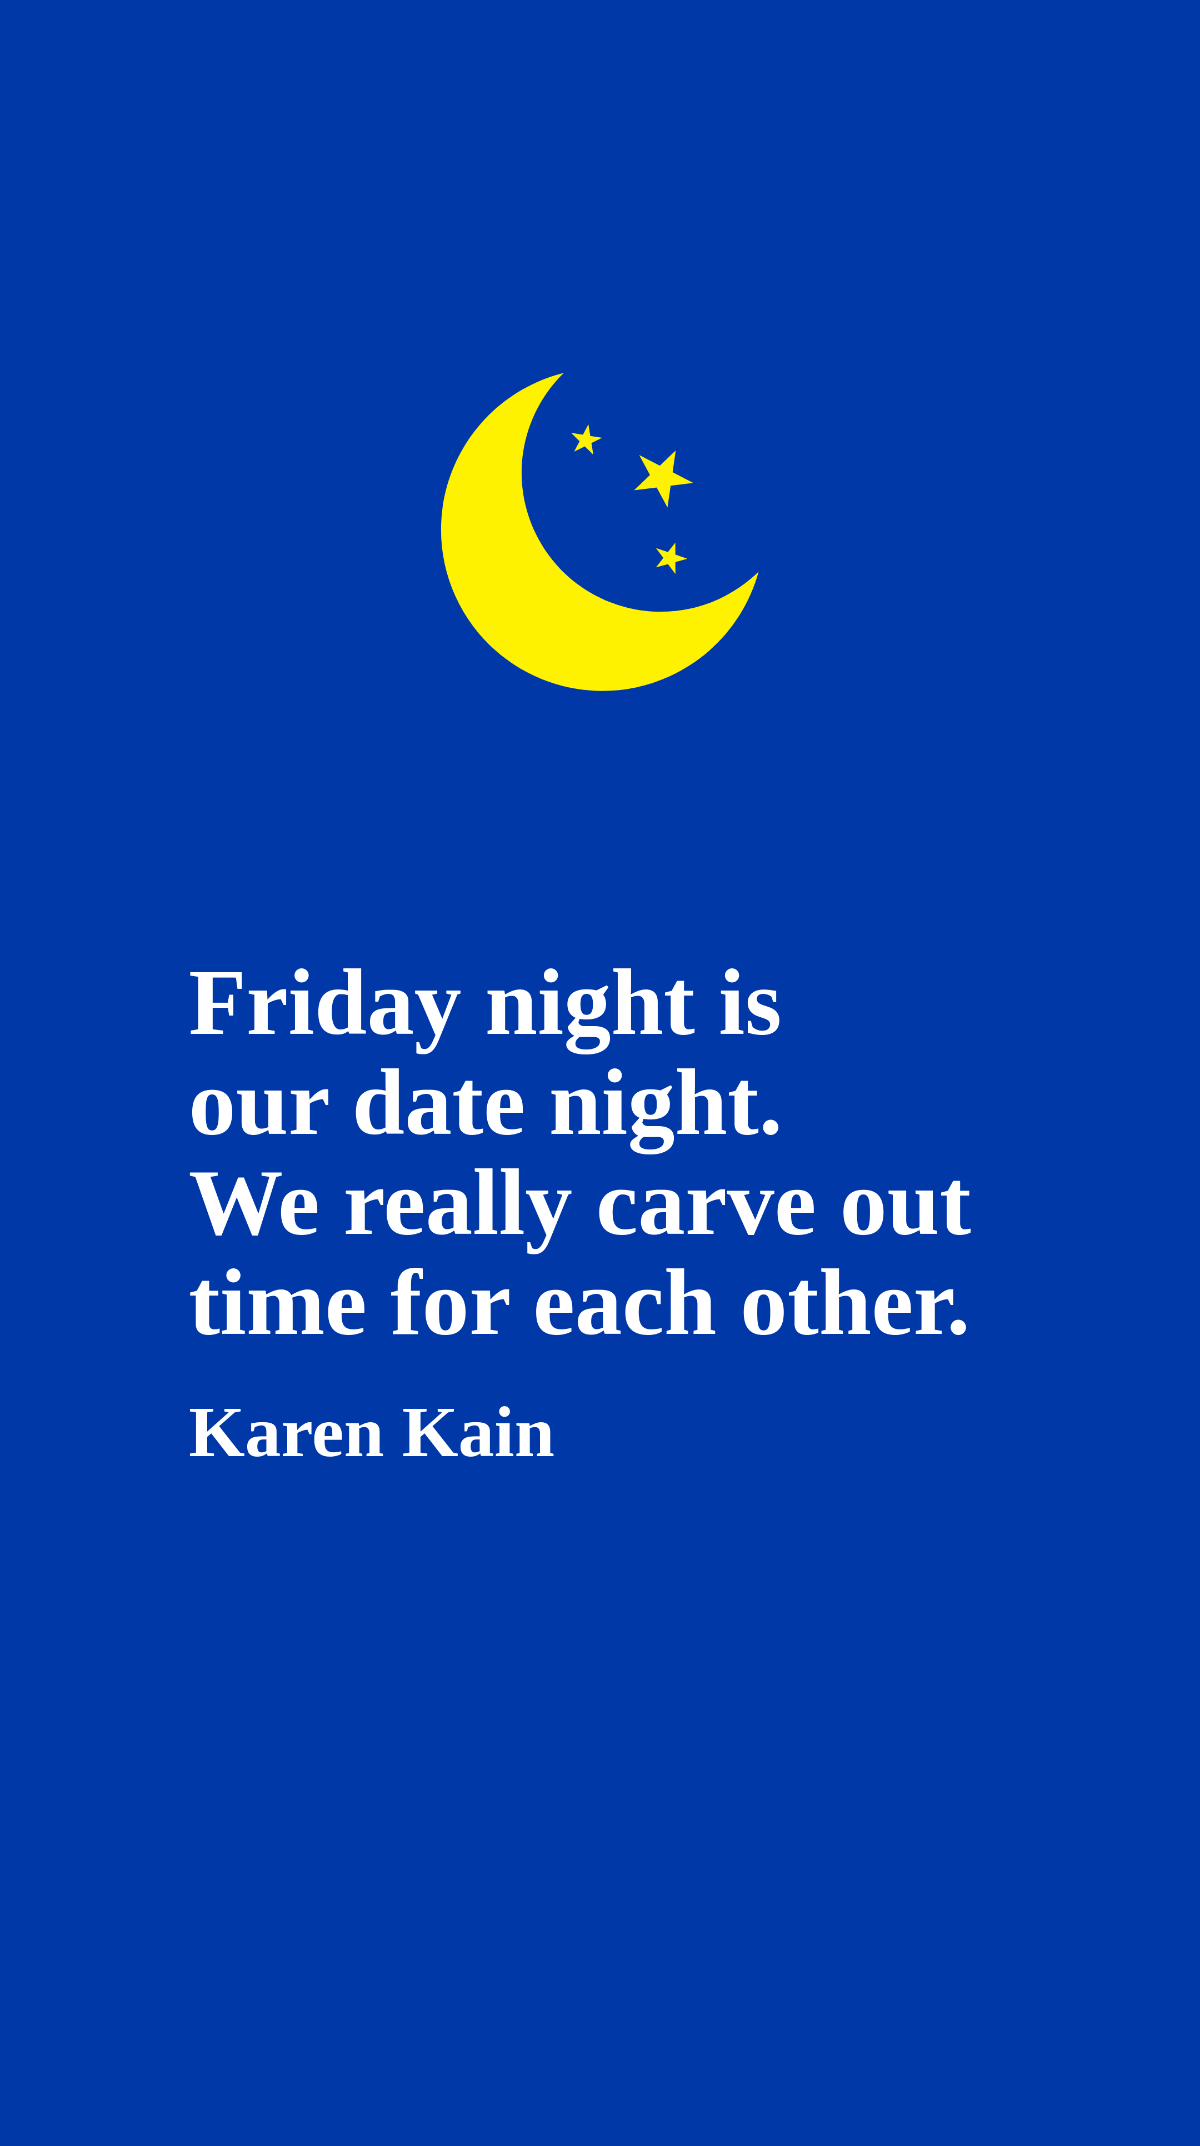 Karen Kain - Friday night is our date night. We really carve out time for each other. 